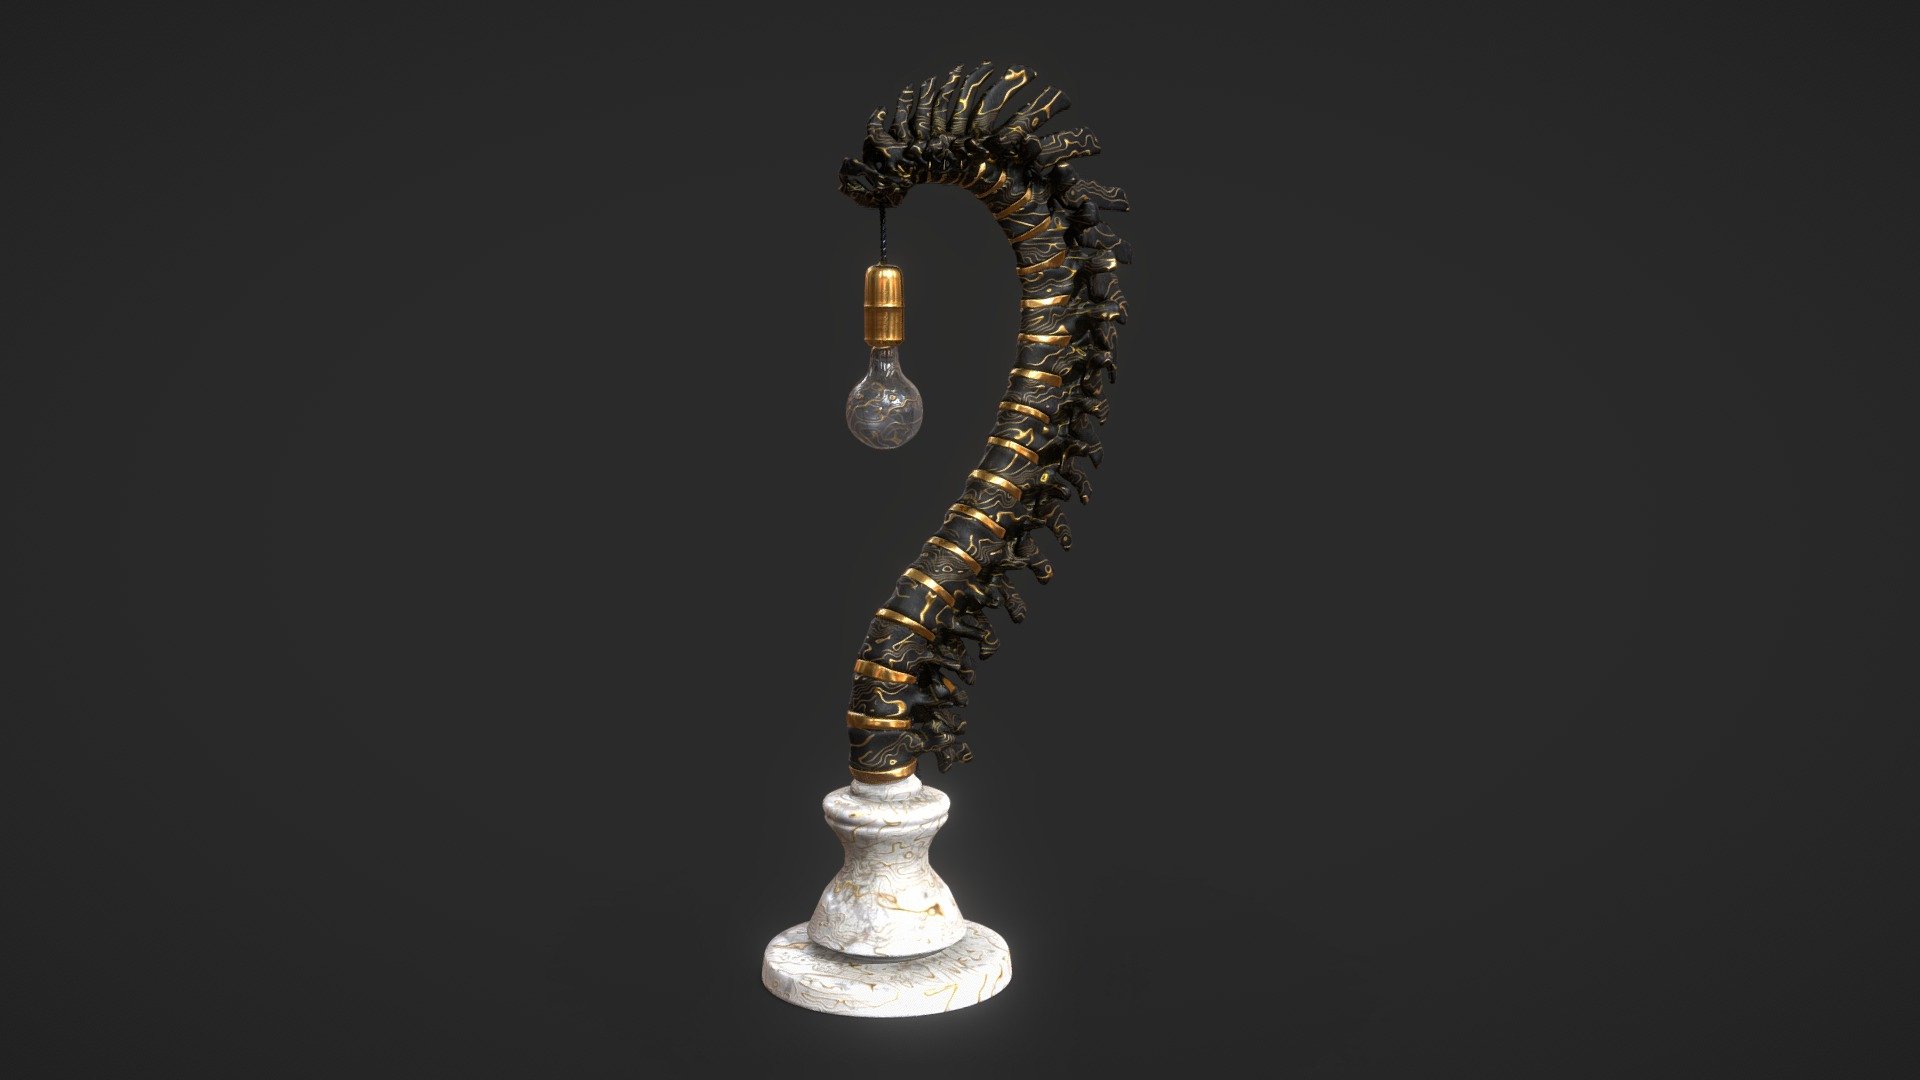 Stylish table lamp in form of a human spine with black, gold and white-marble texture

Technical specifications:

Close-up model

Optimized model

non-overlapping UV map

ready for animation

PBR textures 2K resolution: Normal, Roughness, Albedo, Metal, Ambient Occlusion, opacity maps

Download package includes FBX, obj which are applicable for 3ds Max, Maya, Unreal Engine, Unity, Blender.

Enjoy! - Black spine-form table lamp - Buy Royalty Free 3D model by U3DA (@unreal.artists) 3d model